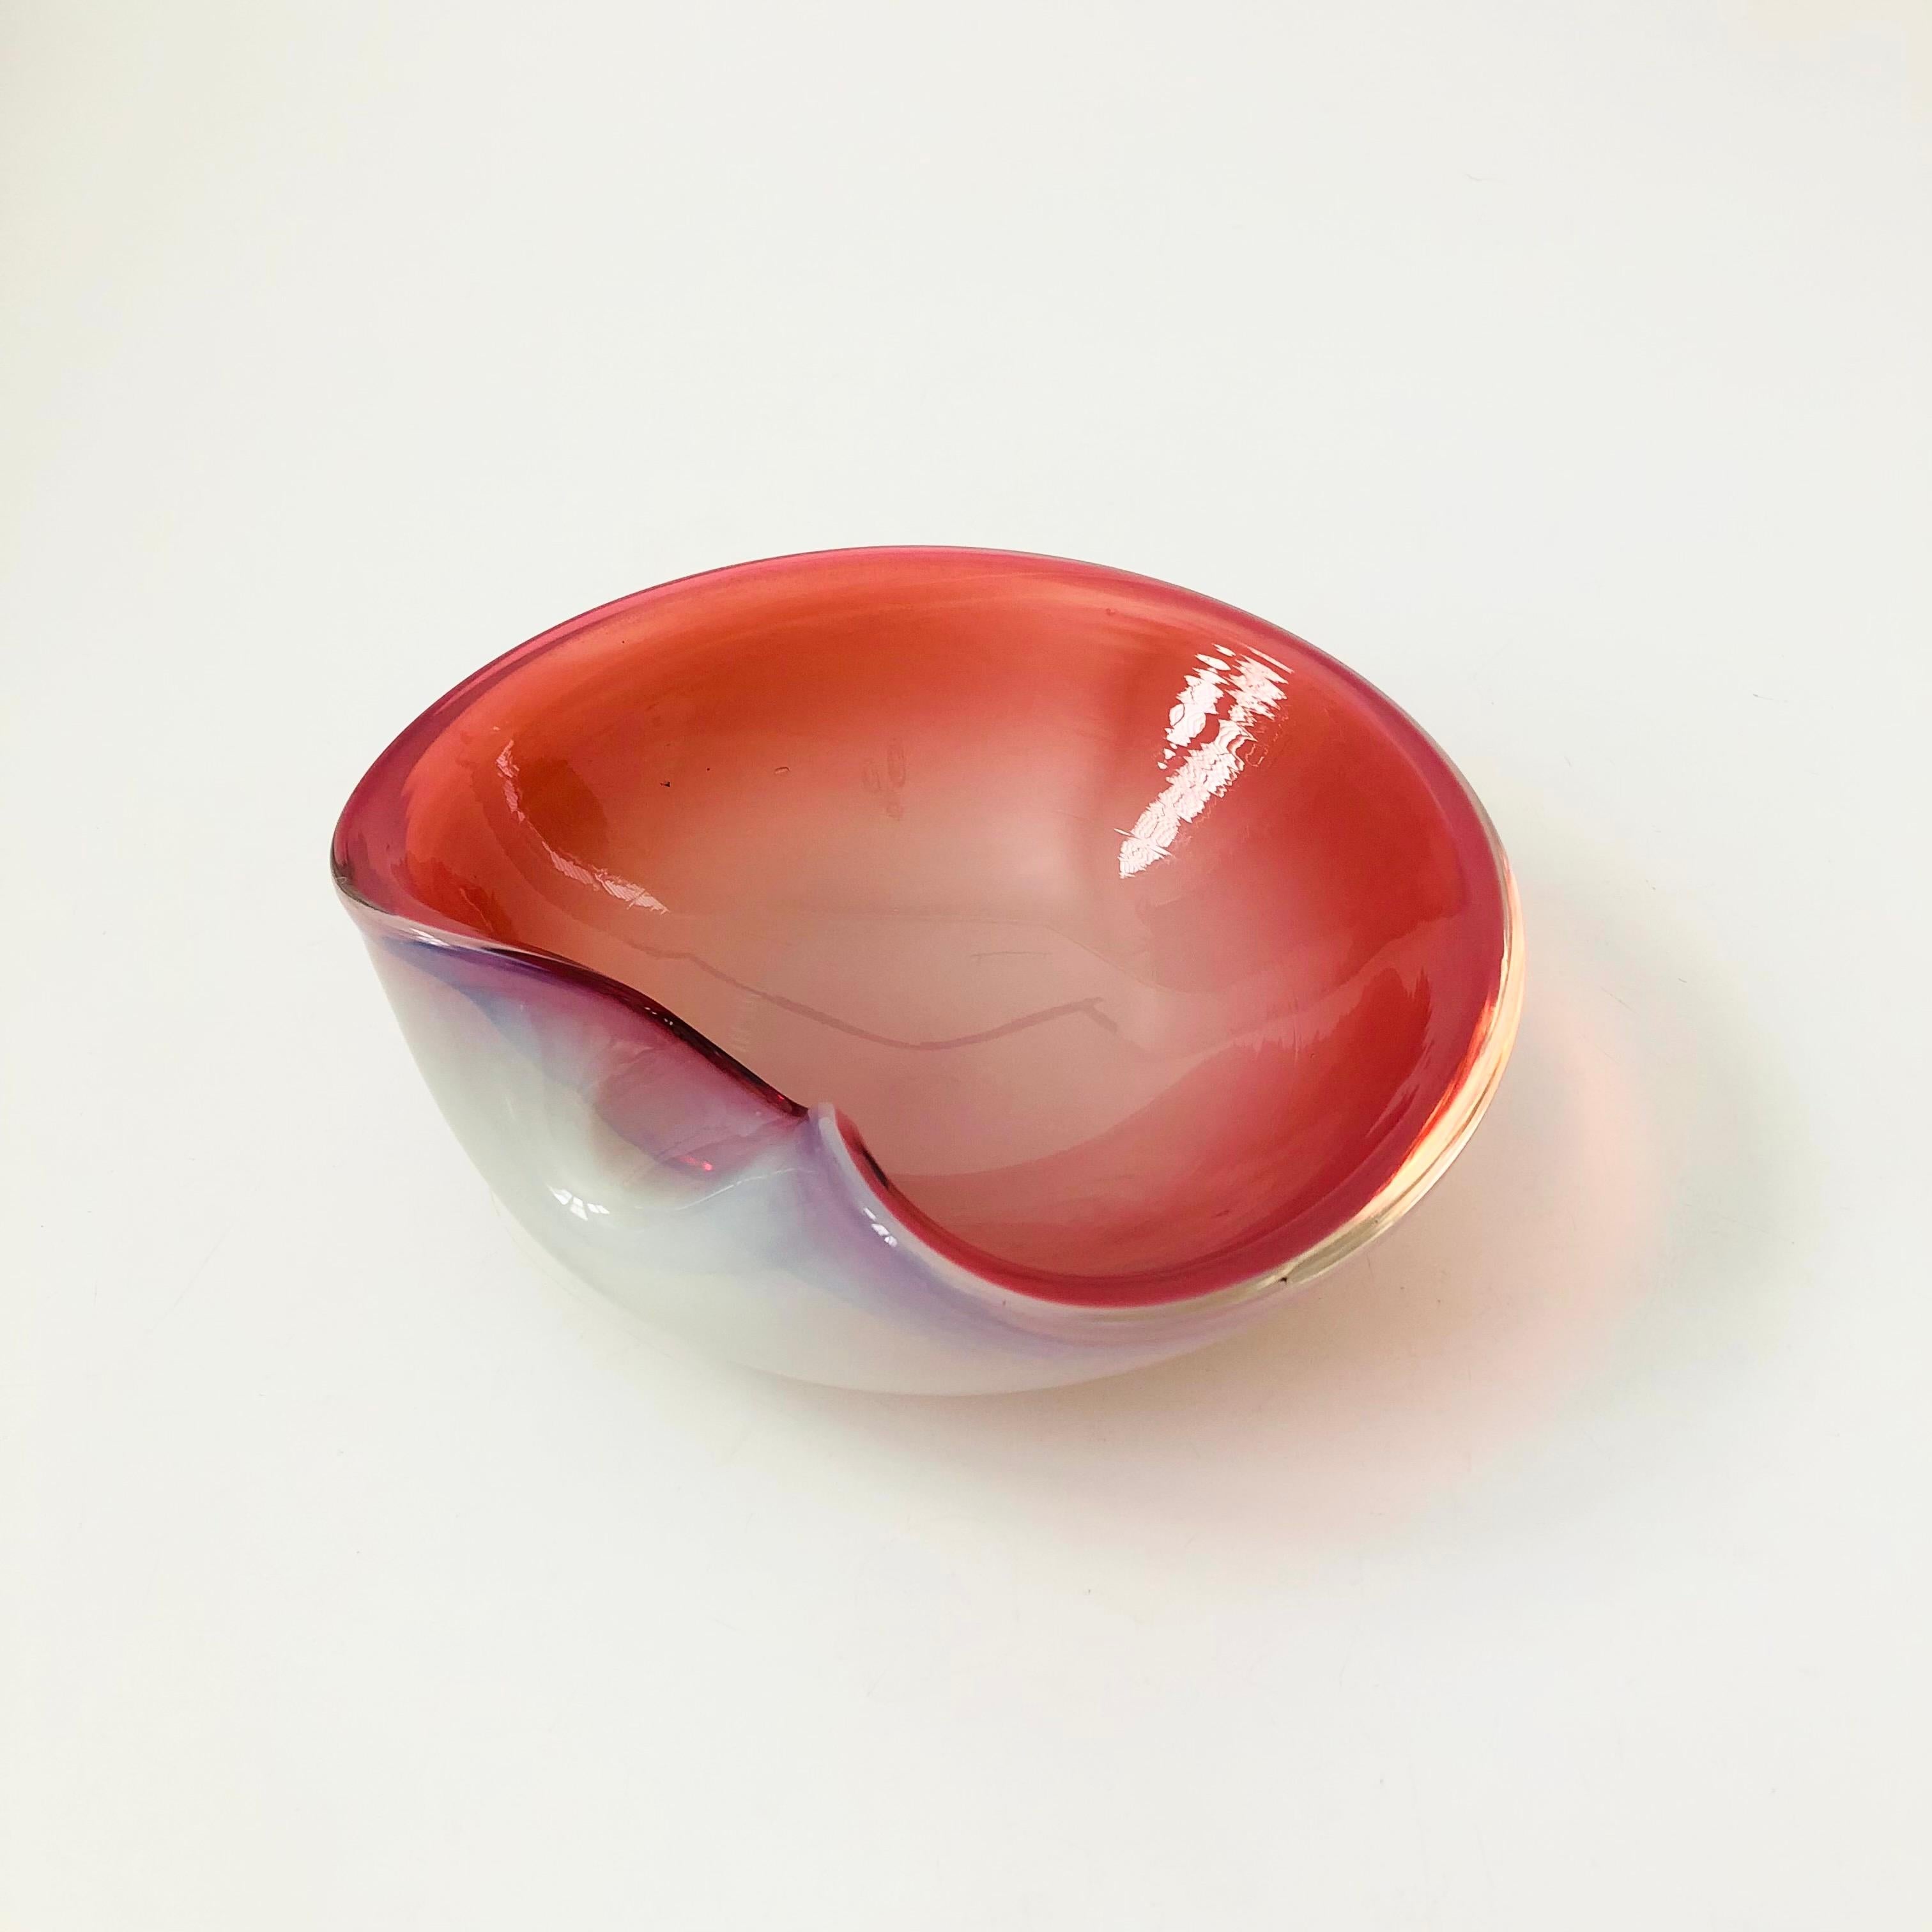 A vintage art glass bowl by Murano. Beautiful layered pink and white color to the thick glass with a folded edge. Remnants of the original recognizable made in Italy, Murano sticker still attached to the base.

